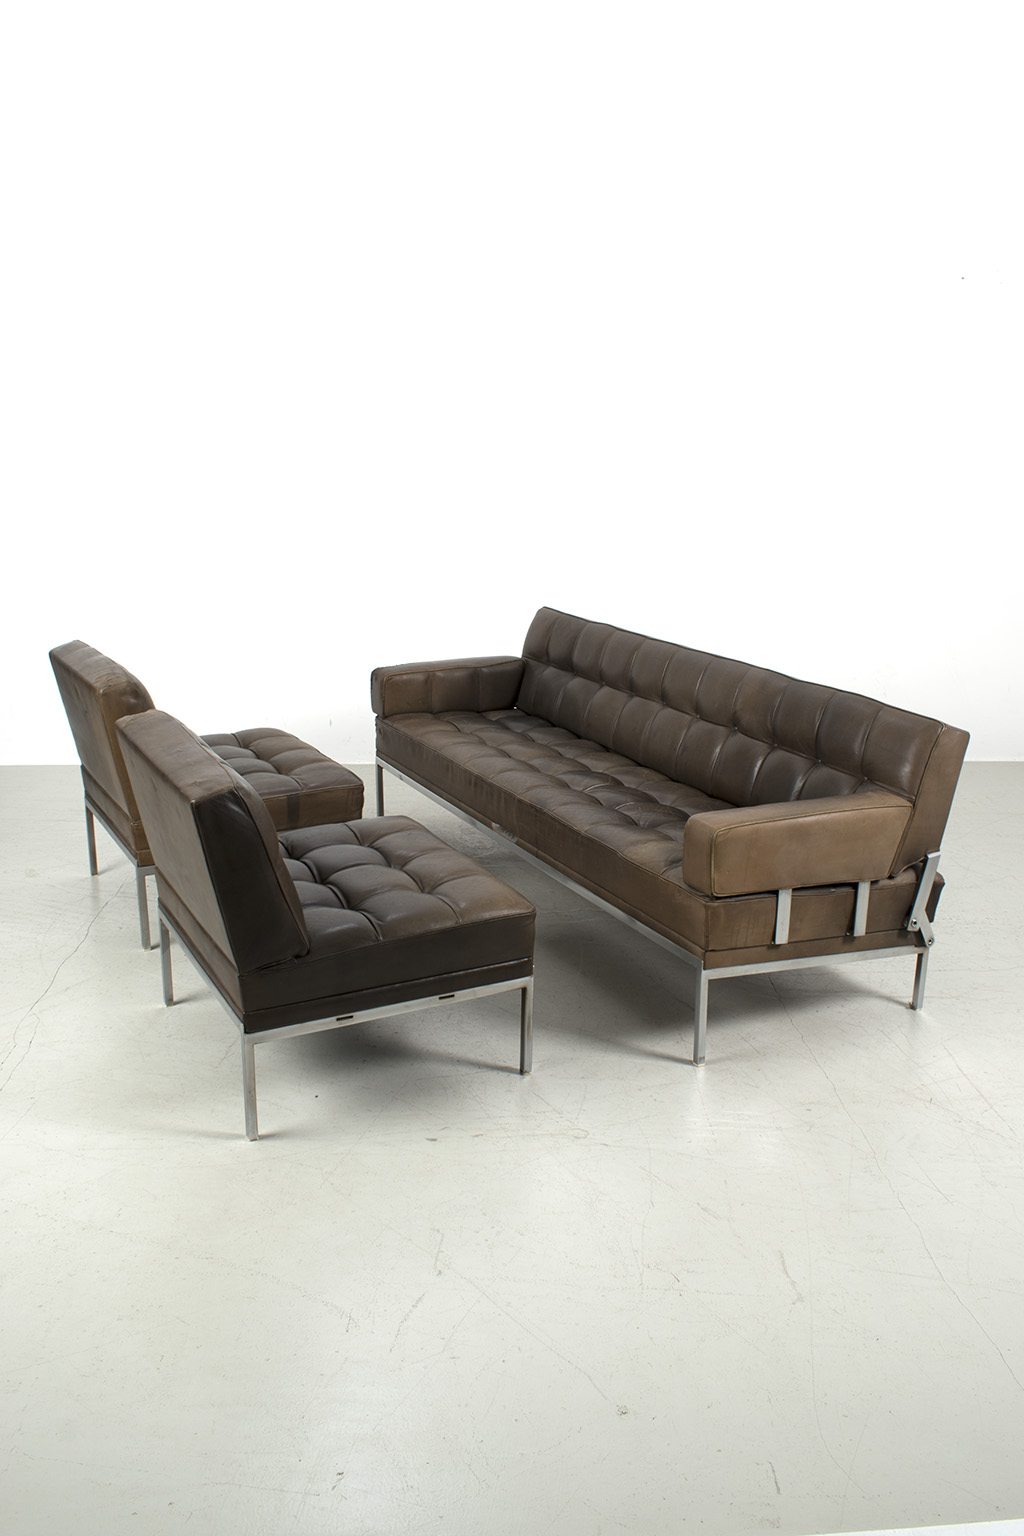 ‘Constanze’ sofa with 2 armchairs